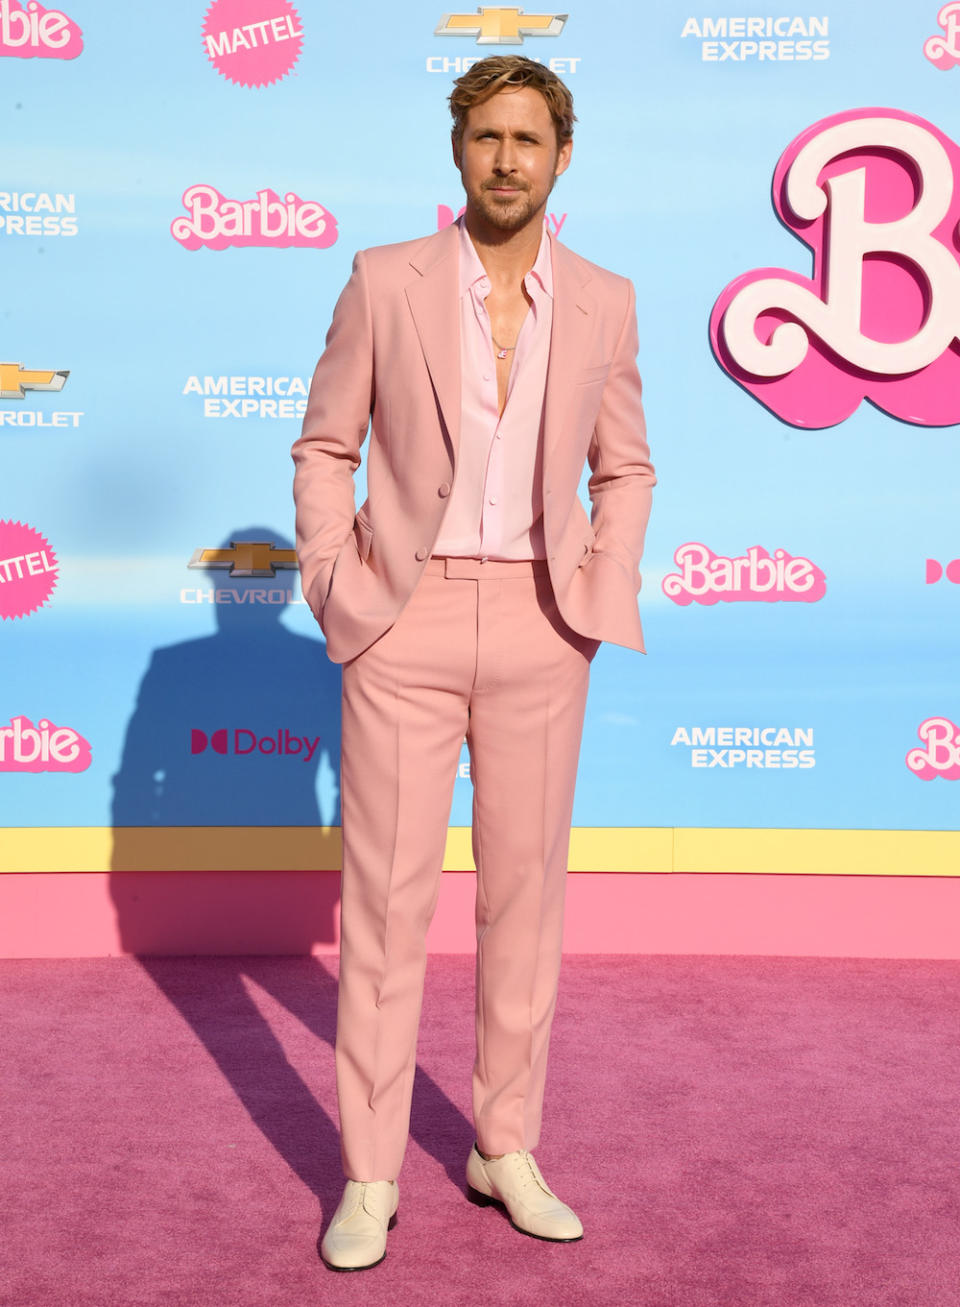 LOS ANGELES, CALIFORNIA - JULY 09: Ryan Gosling attends the World Premiere of "Barbie" at the Shrine Auditorium and Expo Hall on July 09, 2023 in Los Angeles, California. (Photo by Jon Kopaloff/Getty Images)